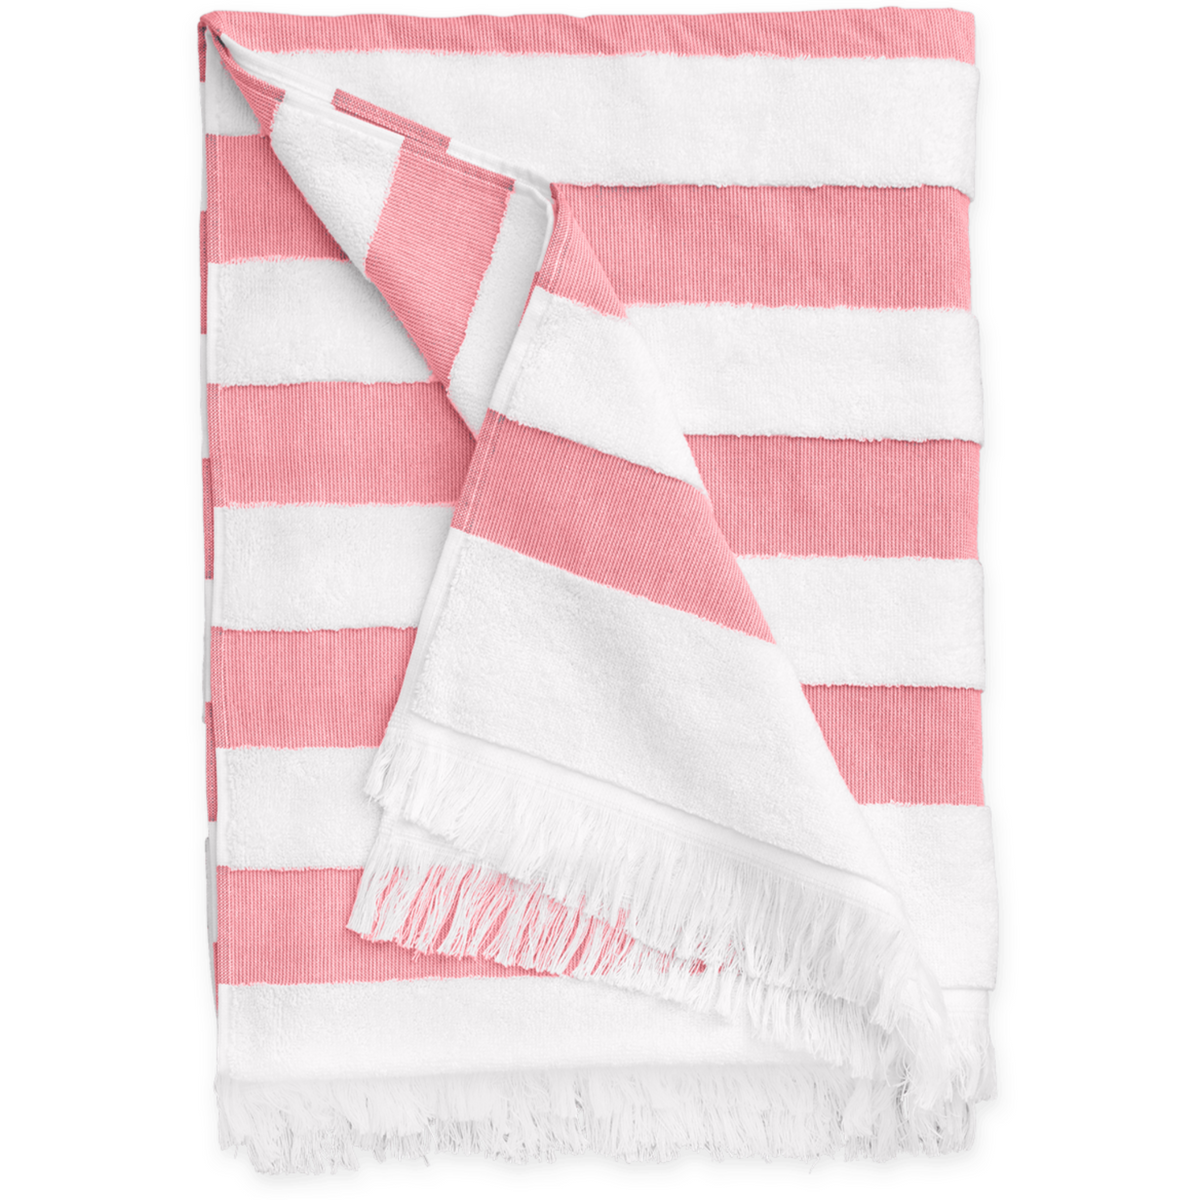 Silo Image of Matouk Amado Pool and Beach Towel in Color Red